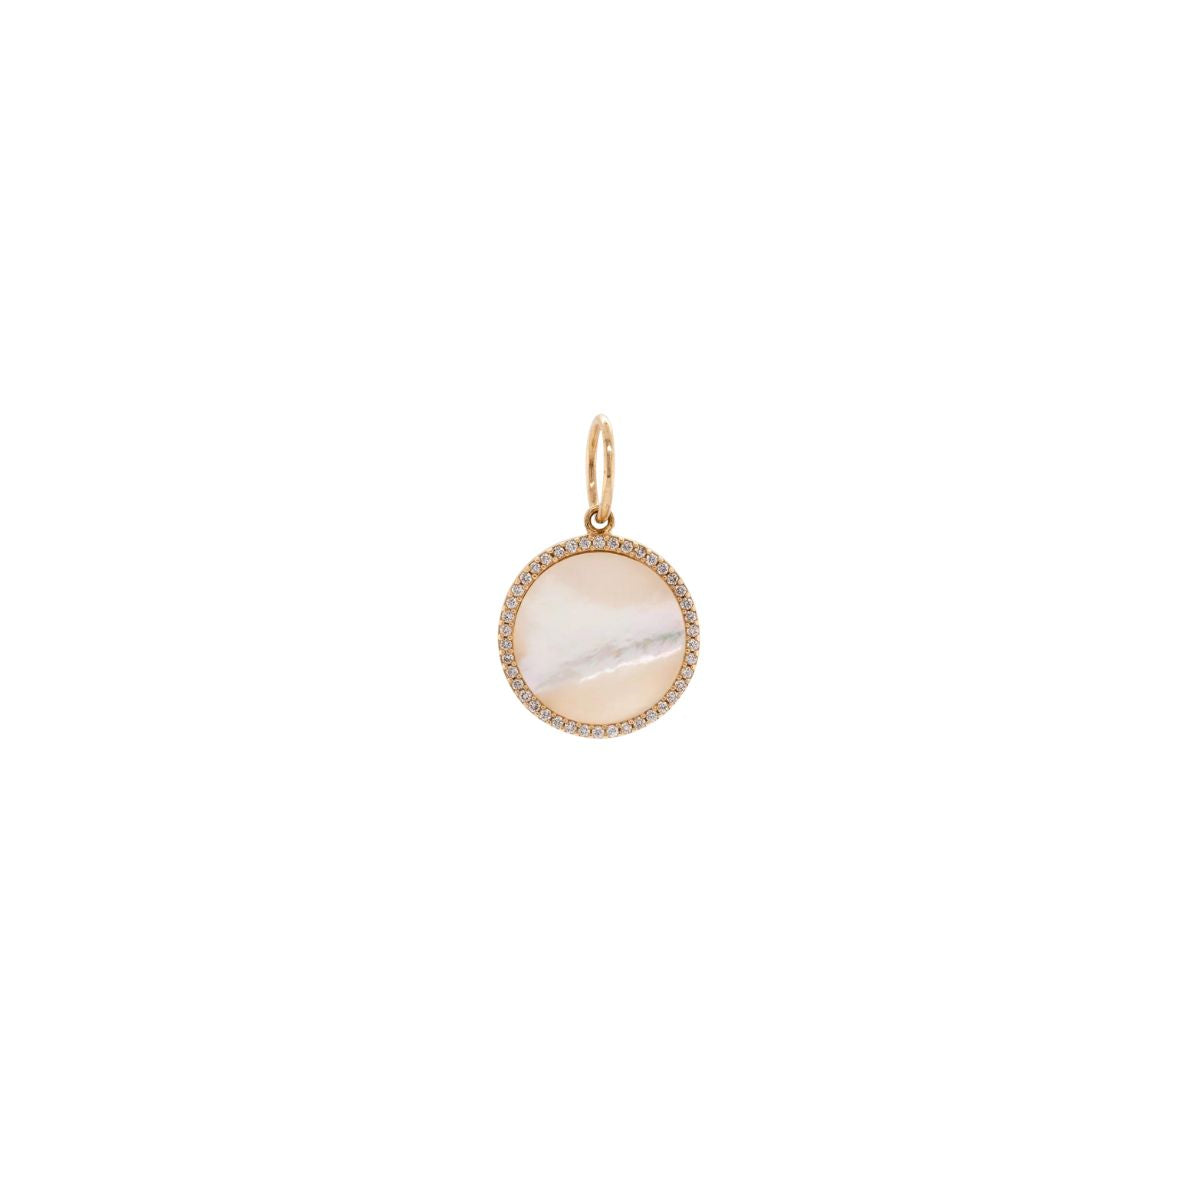 Bridget King Small Mother-of-Pearl Medallion in Yellow Gold